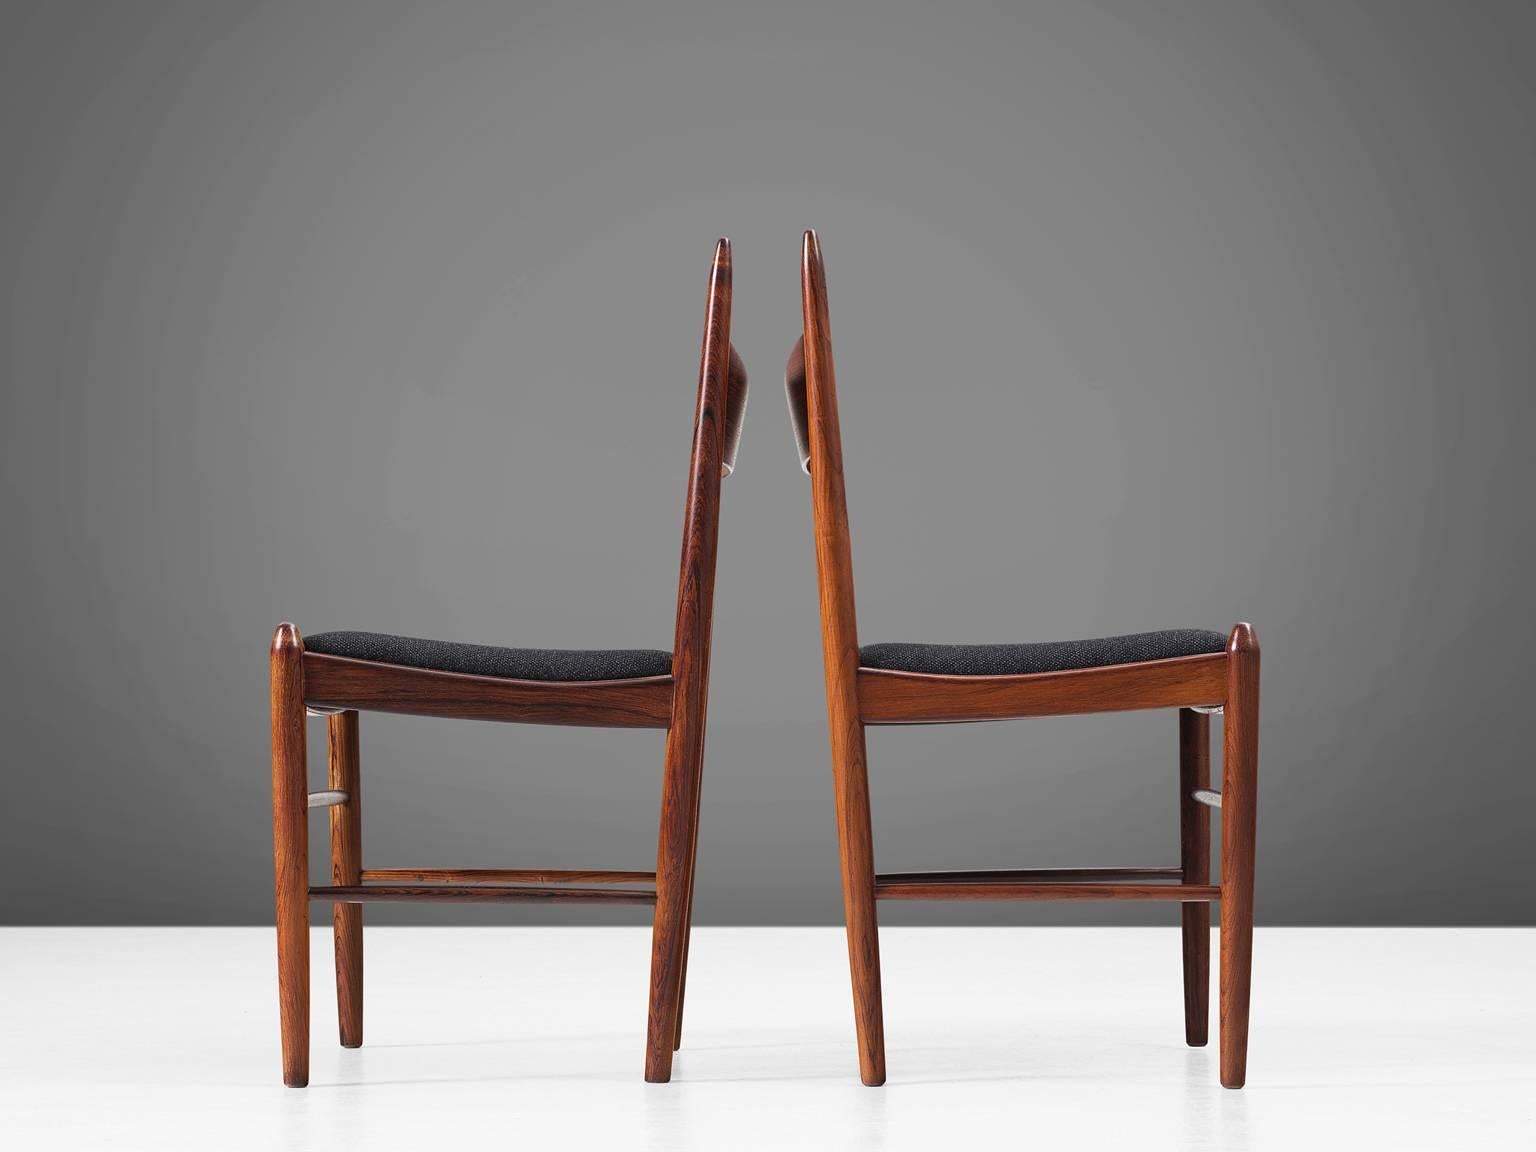 Danish Solid Rosewood Dining Chairs, Denmark, circa 1950